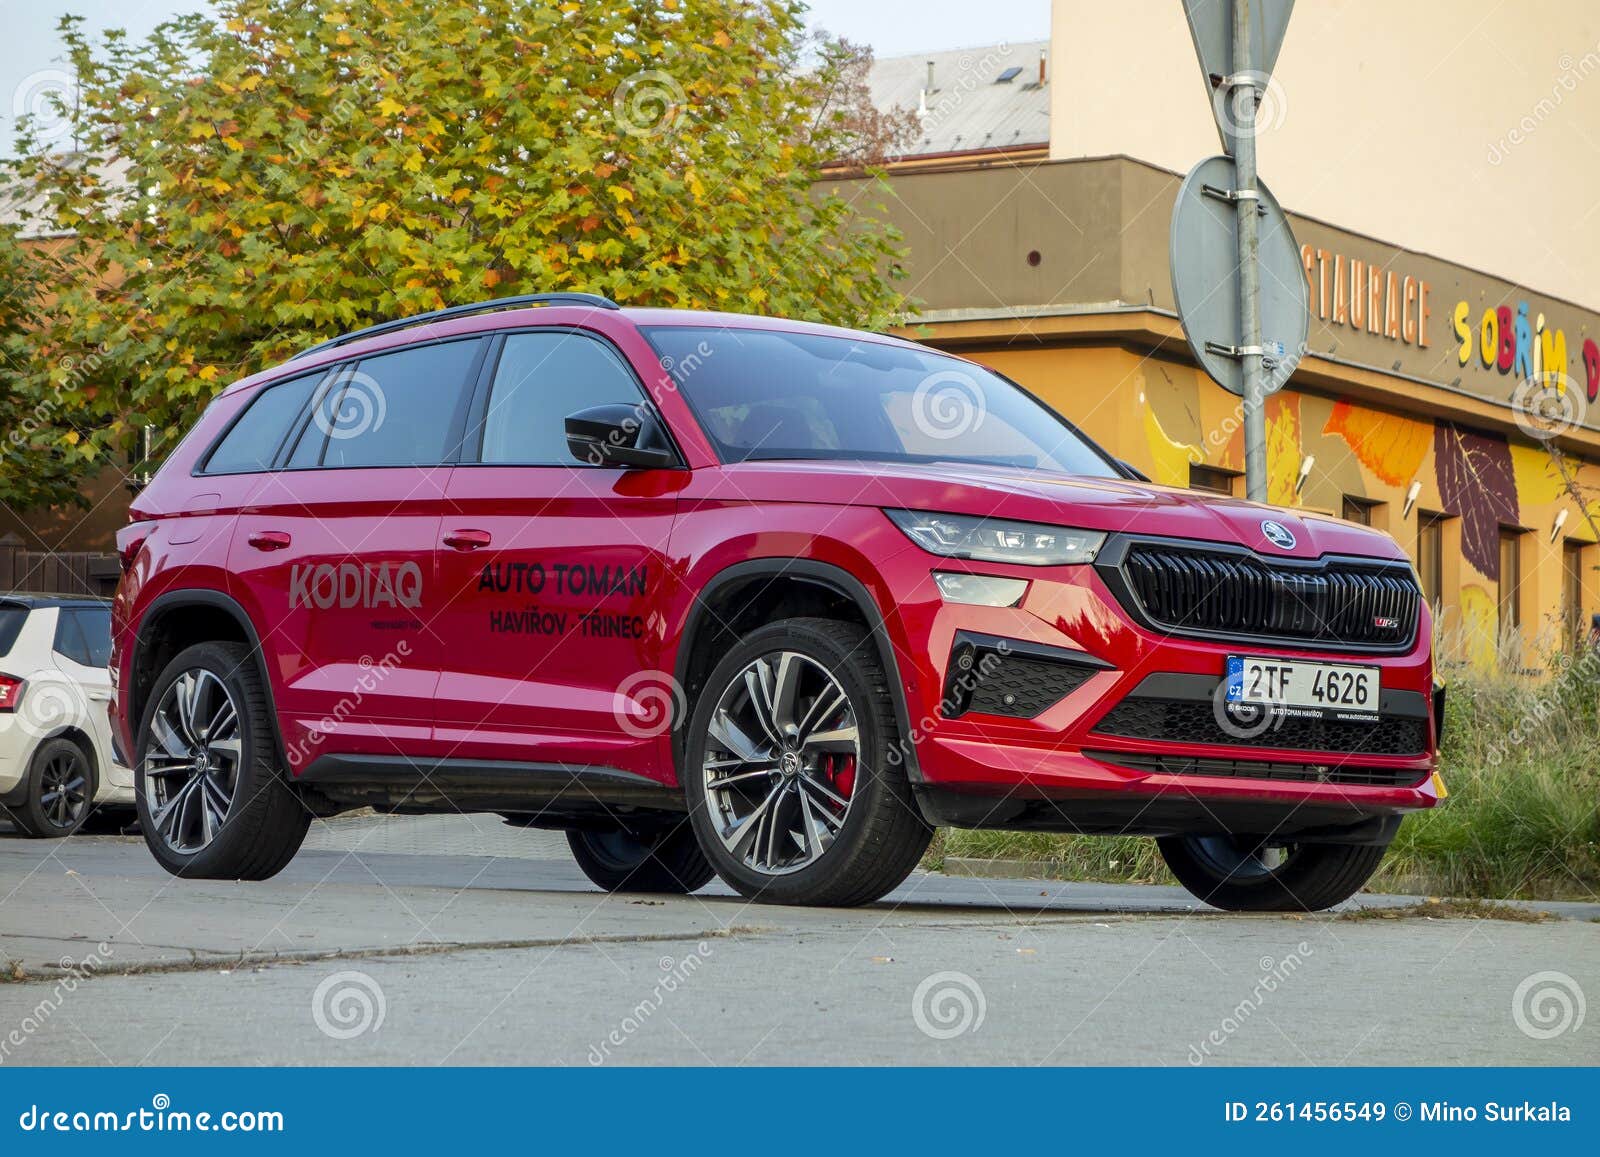 Skoda Kodiaq RS SUV Presented at Dealership with Bright Red Colour  Editorial Stock Image - Image of havirov, sale: 261456549